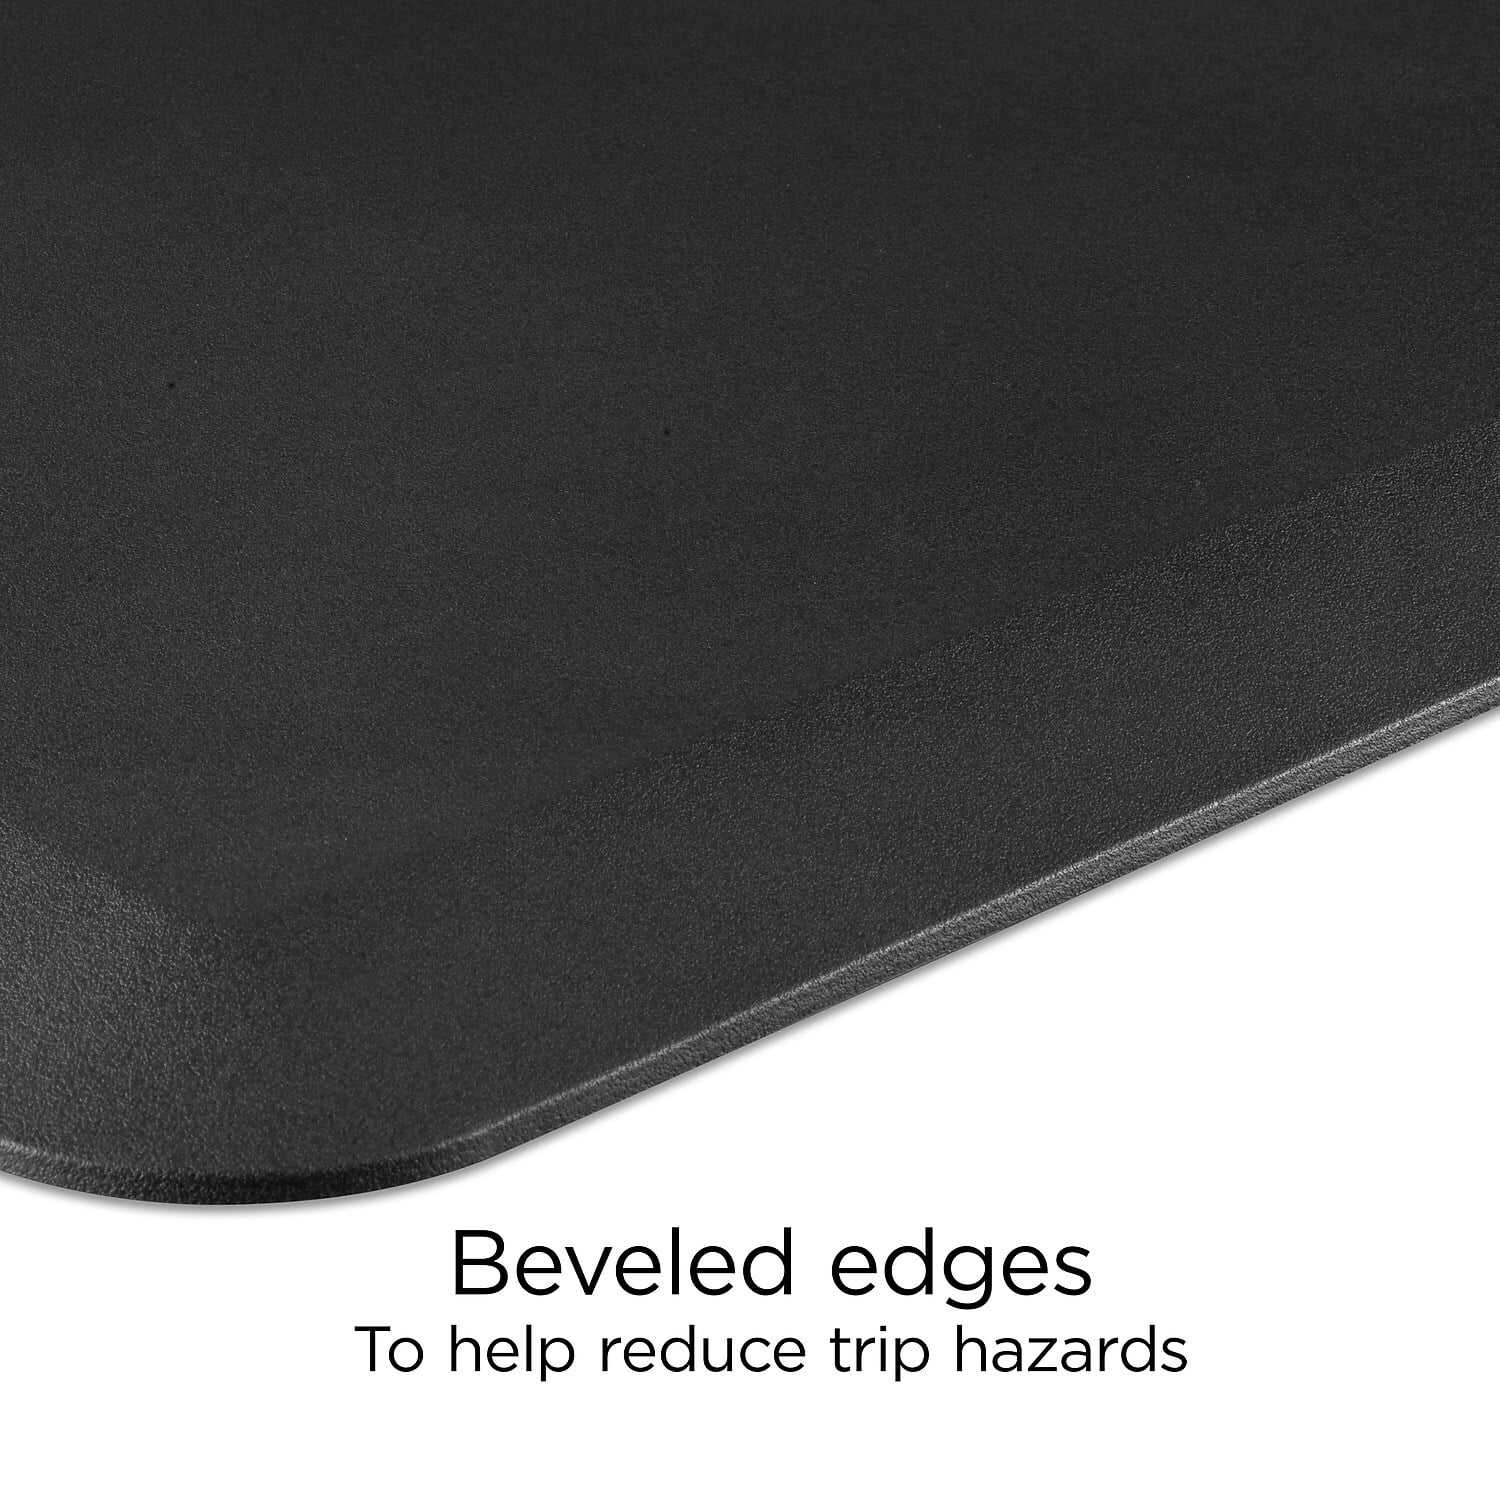 The Leading Anti-Fatigue Mats of 2023 - Sac Bee's Top Reviews